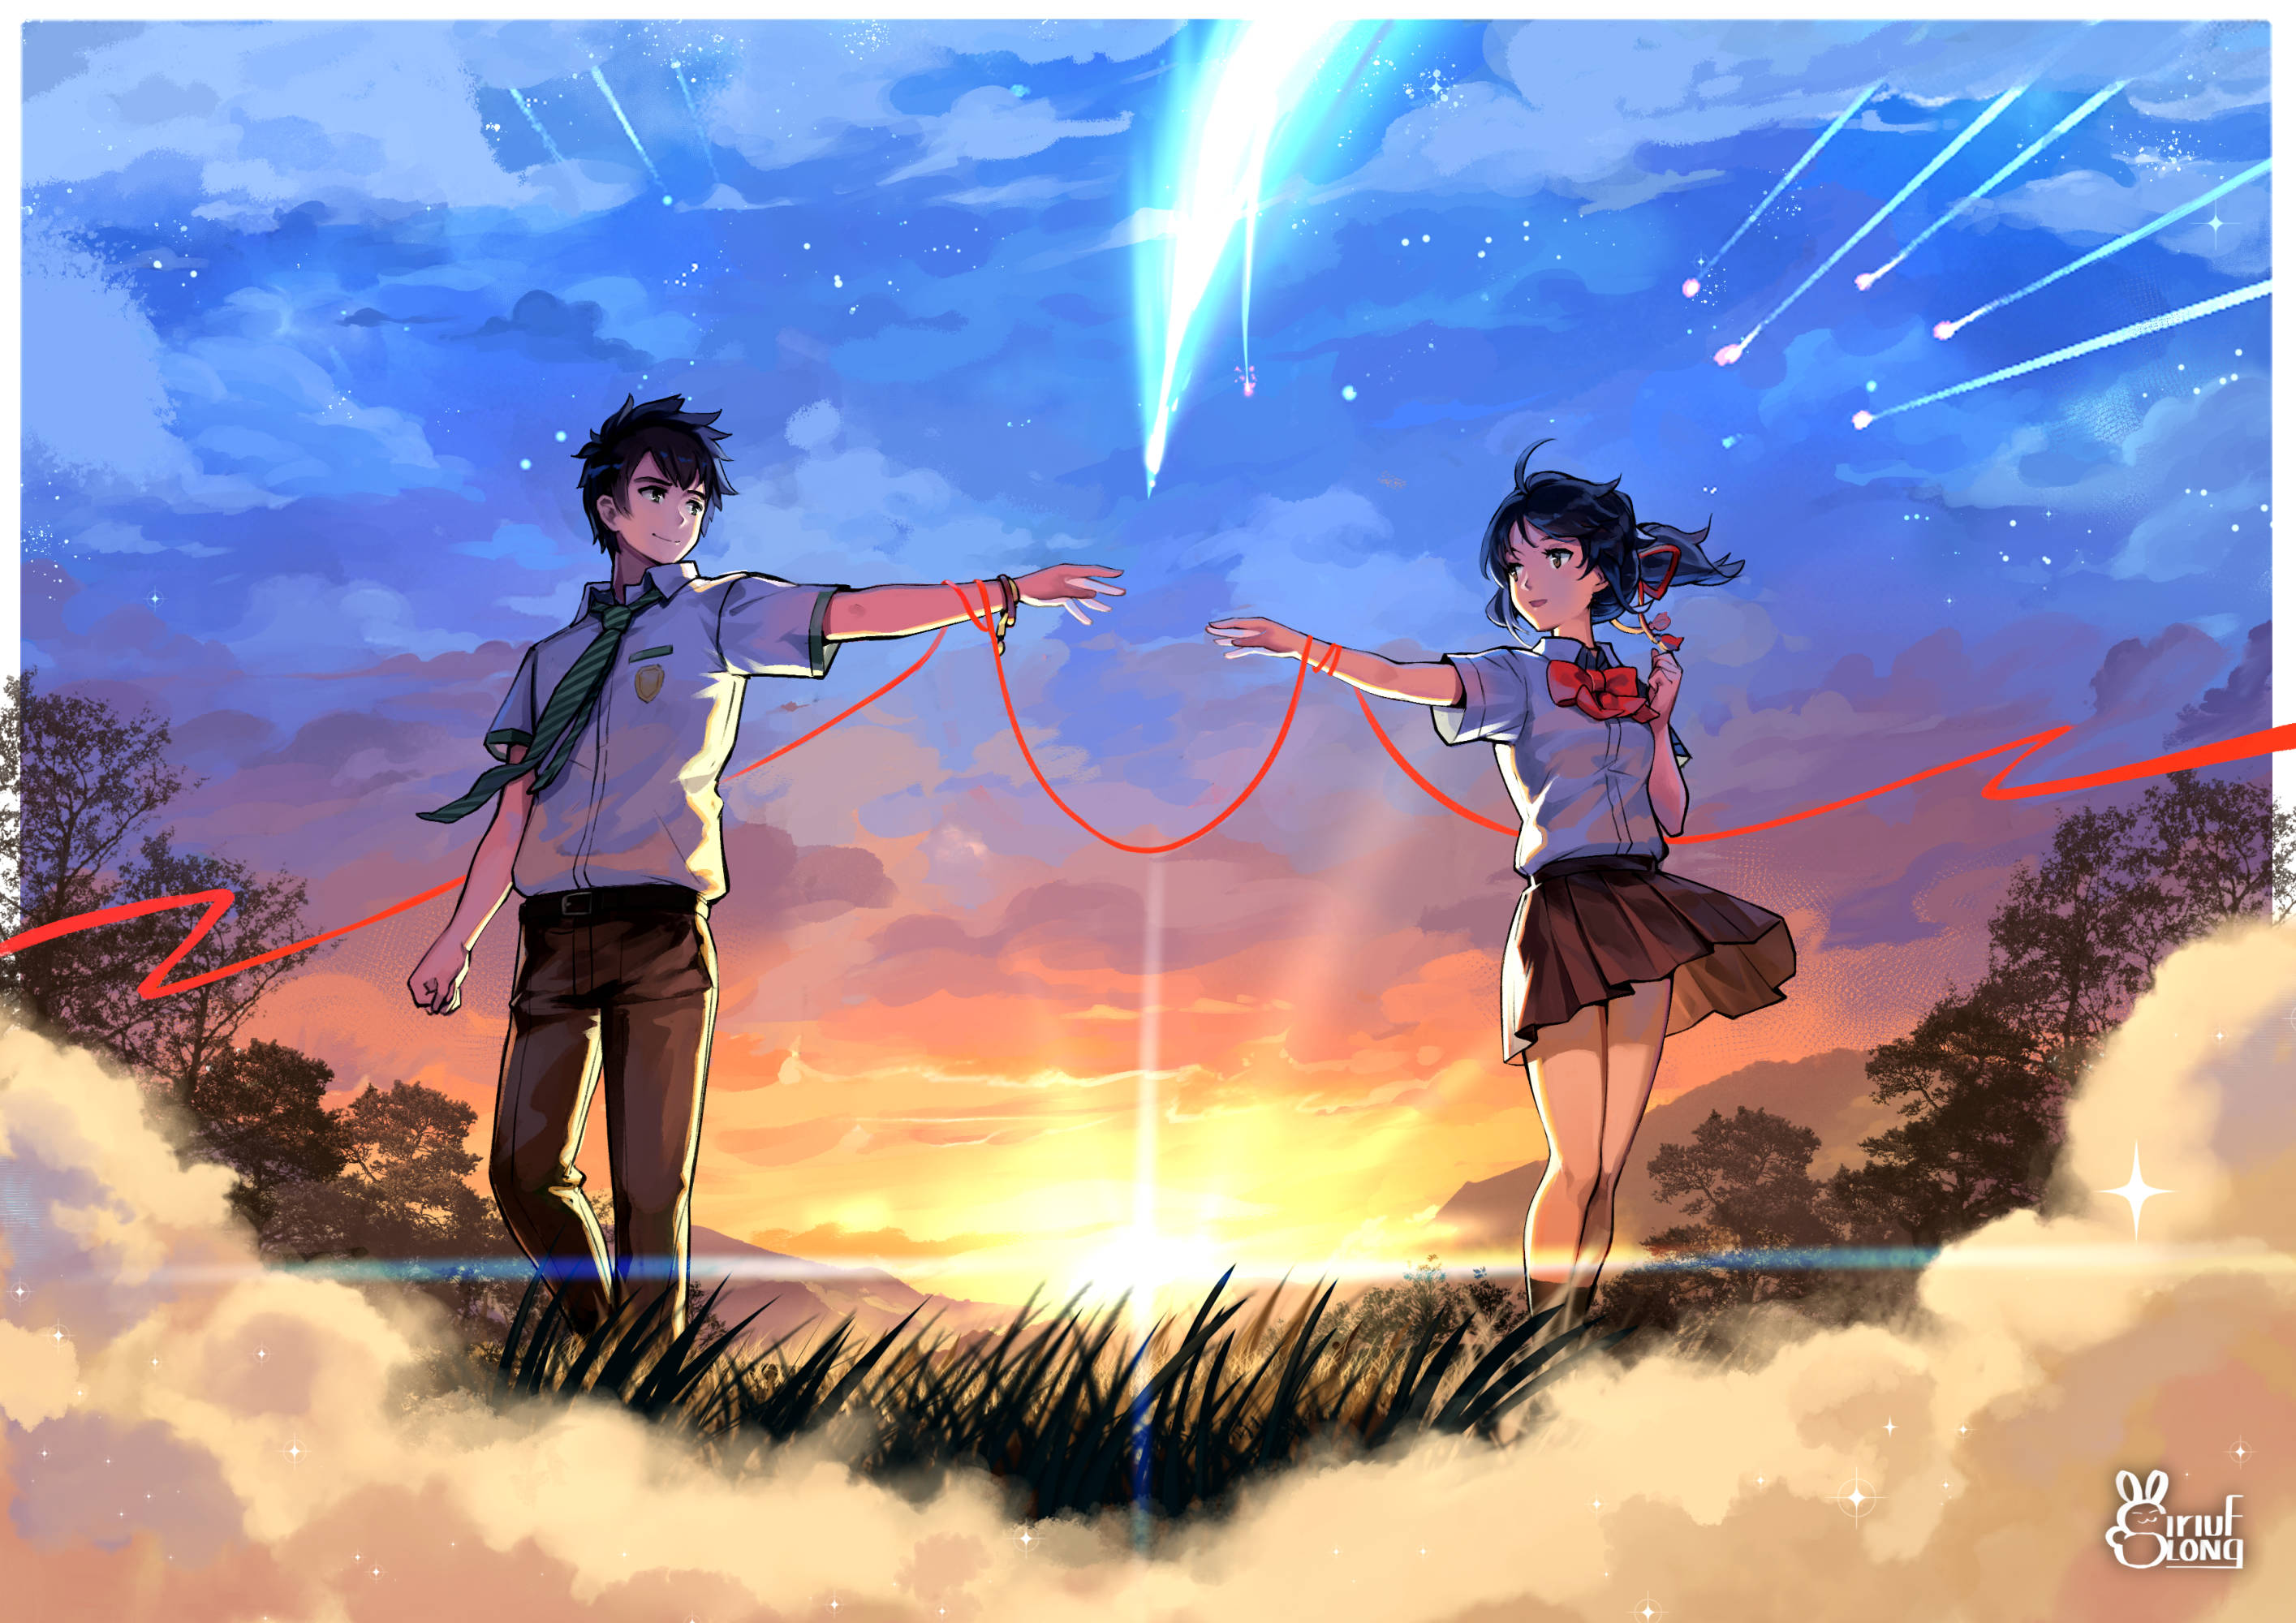 Download Popular Film Your Name Anime Wallpaper 